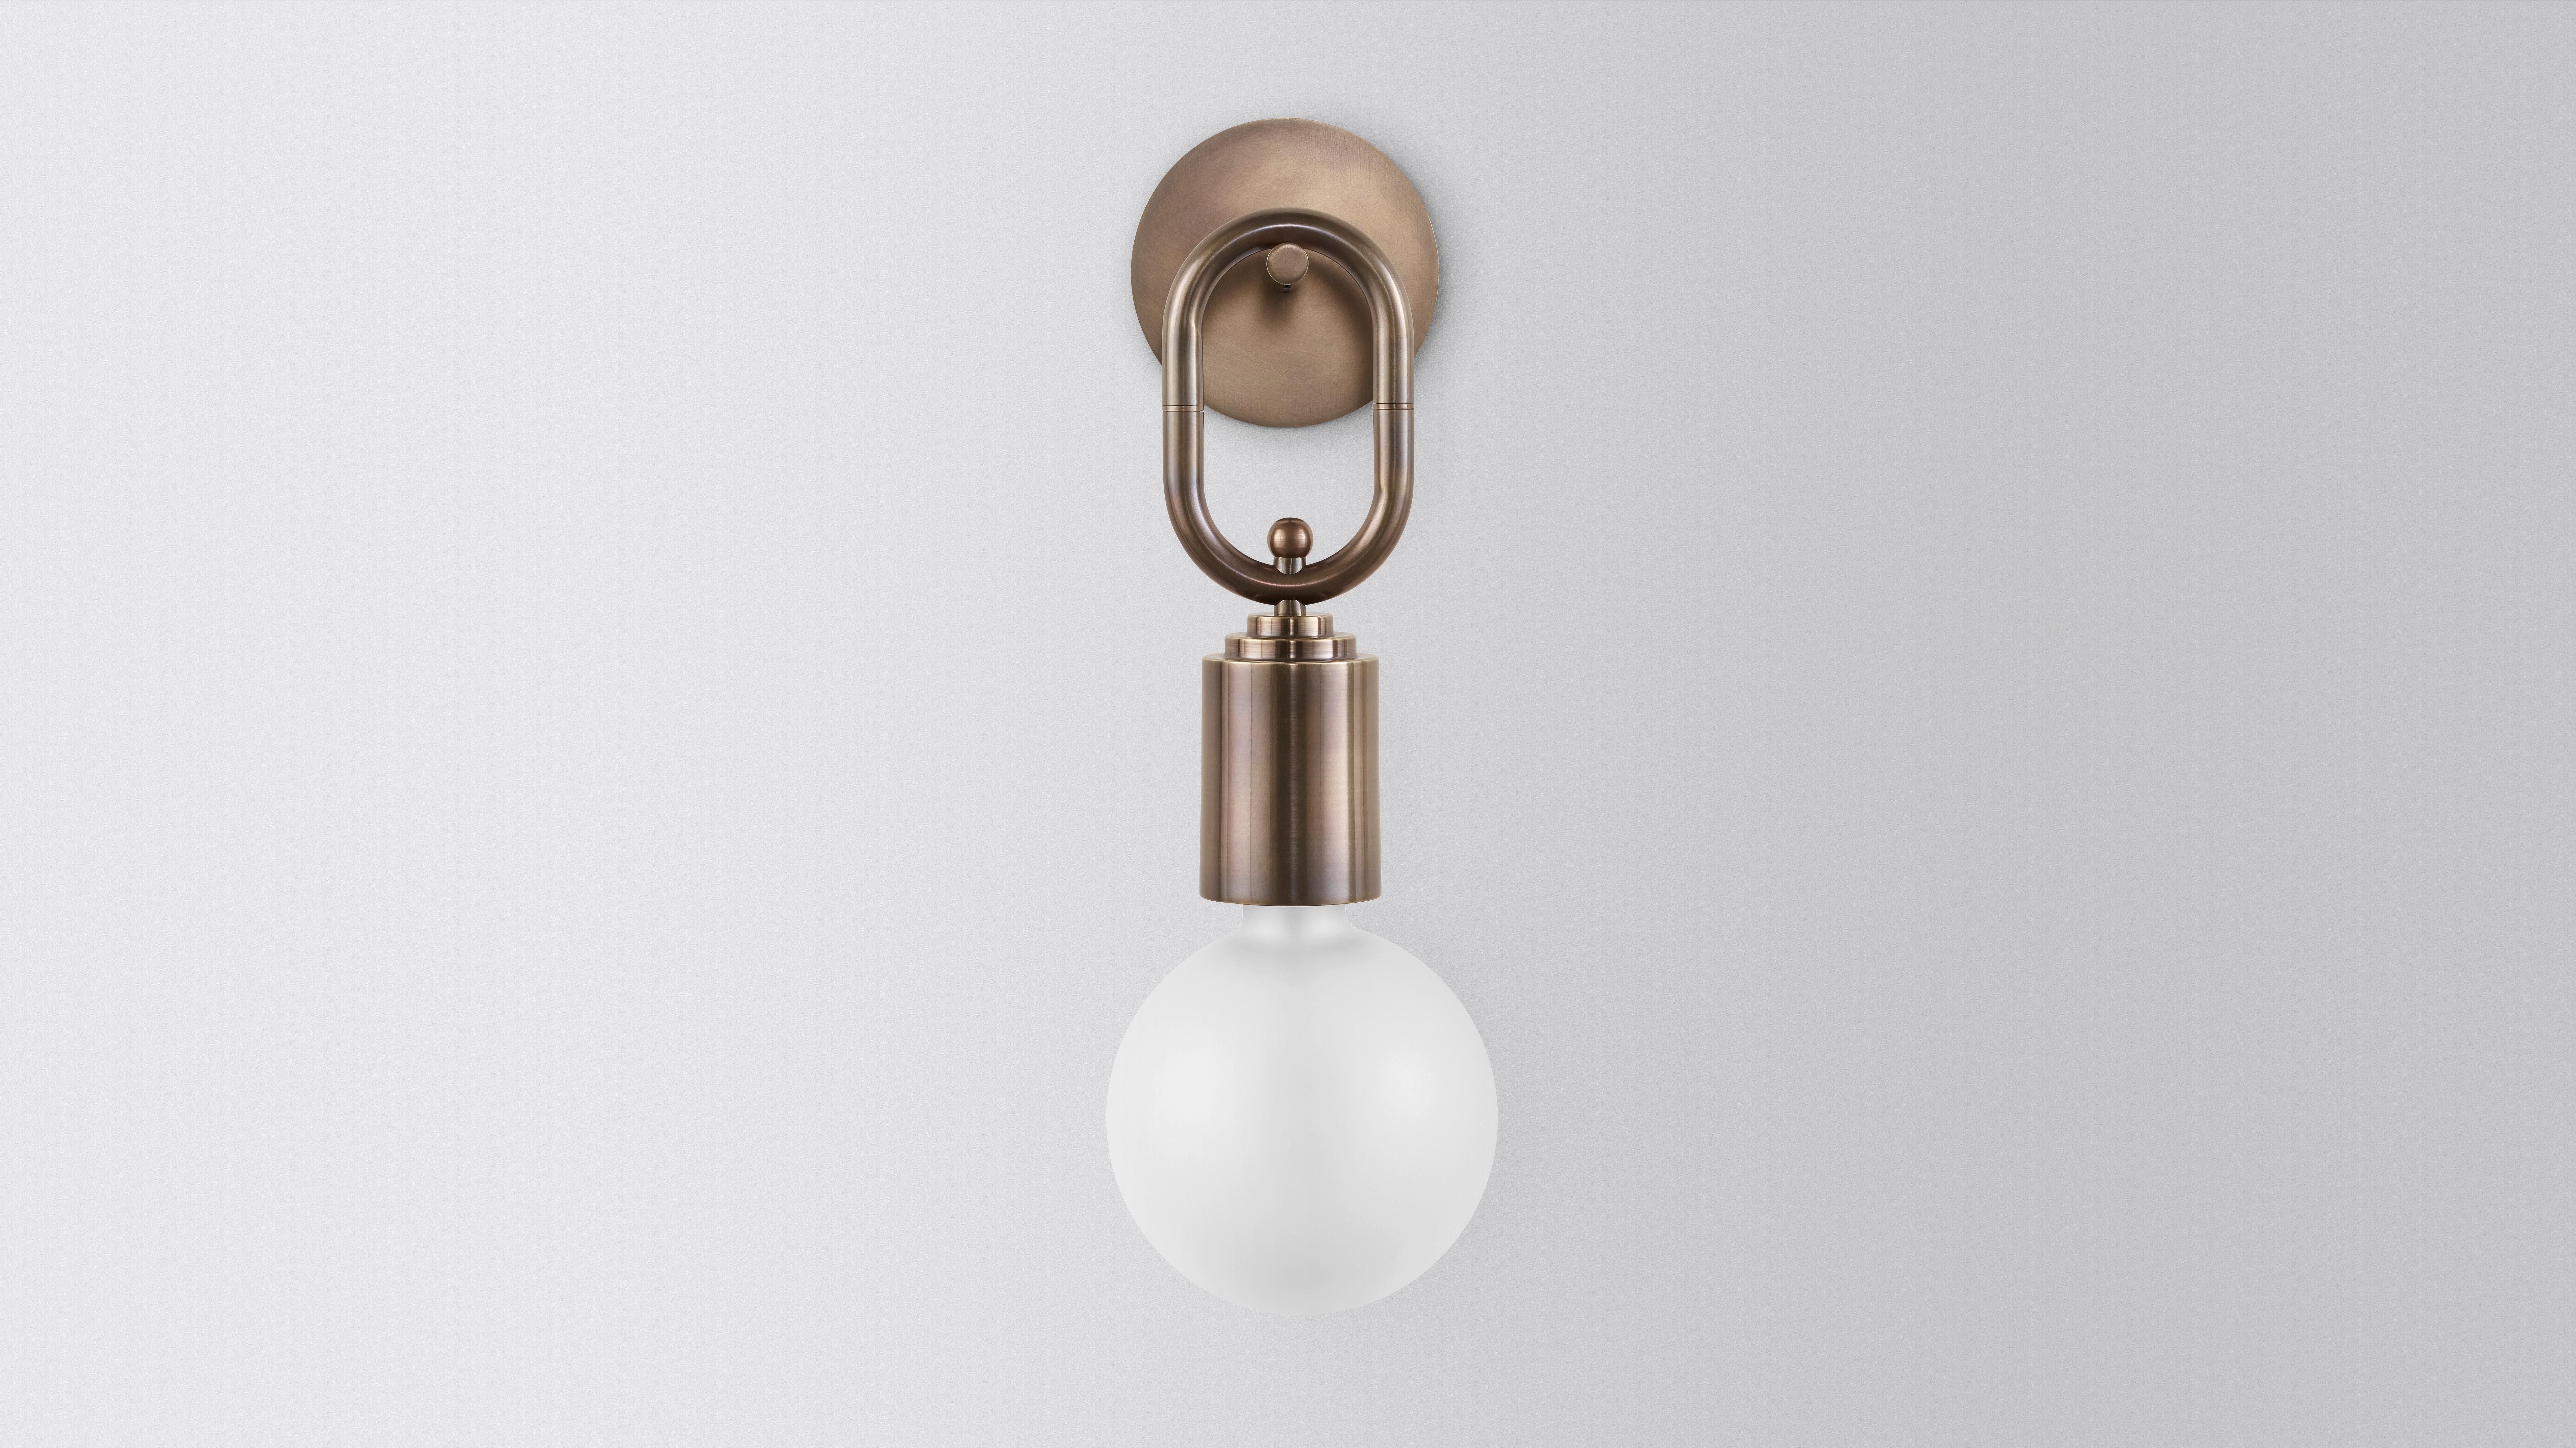 Missing link wall sconce by Volker Haug
Dimensions: Diameter 15 x H 34 cm 
Material: Brass. 
Finish: Polished, Aged, Brushed, Bronzed, Blackened, or Plated
Lamp: 240V G9 LED or 12V G4 LED
Glass Shell: ø 150 mm Opal or Frosted
Weight: Approx. 1